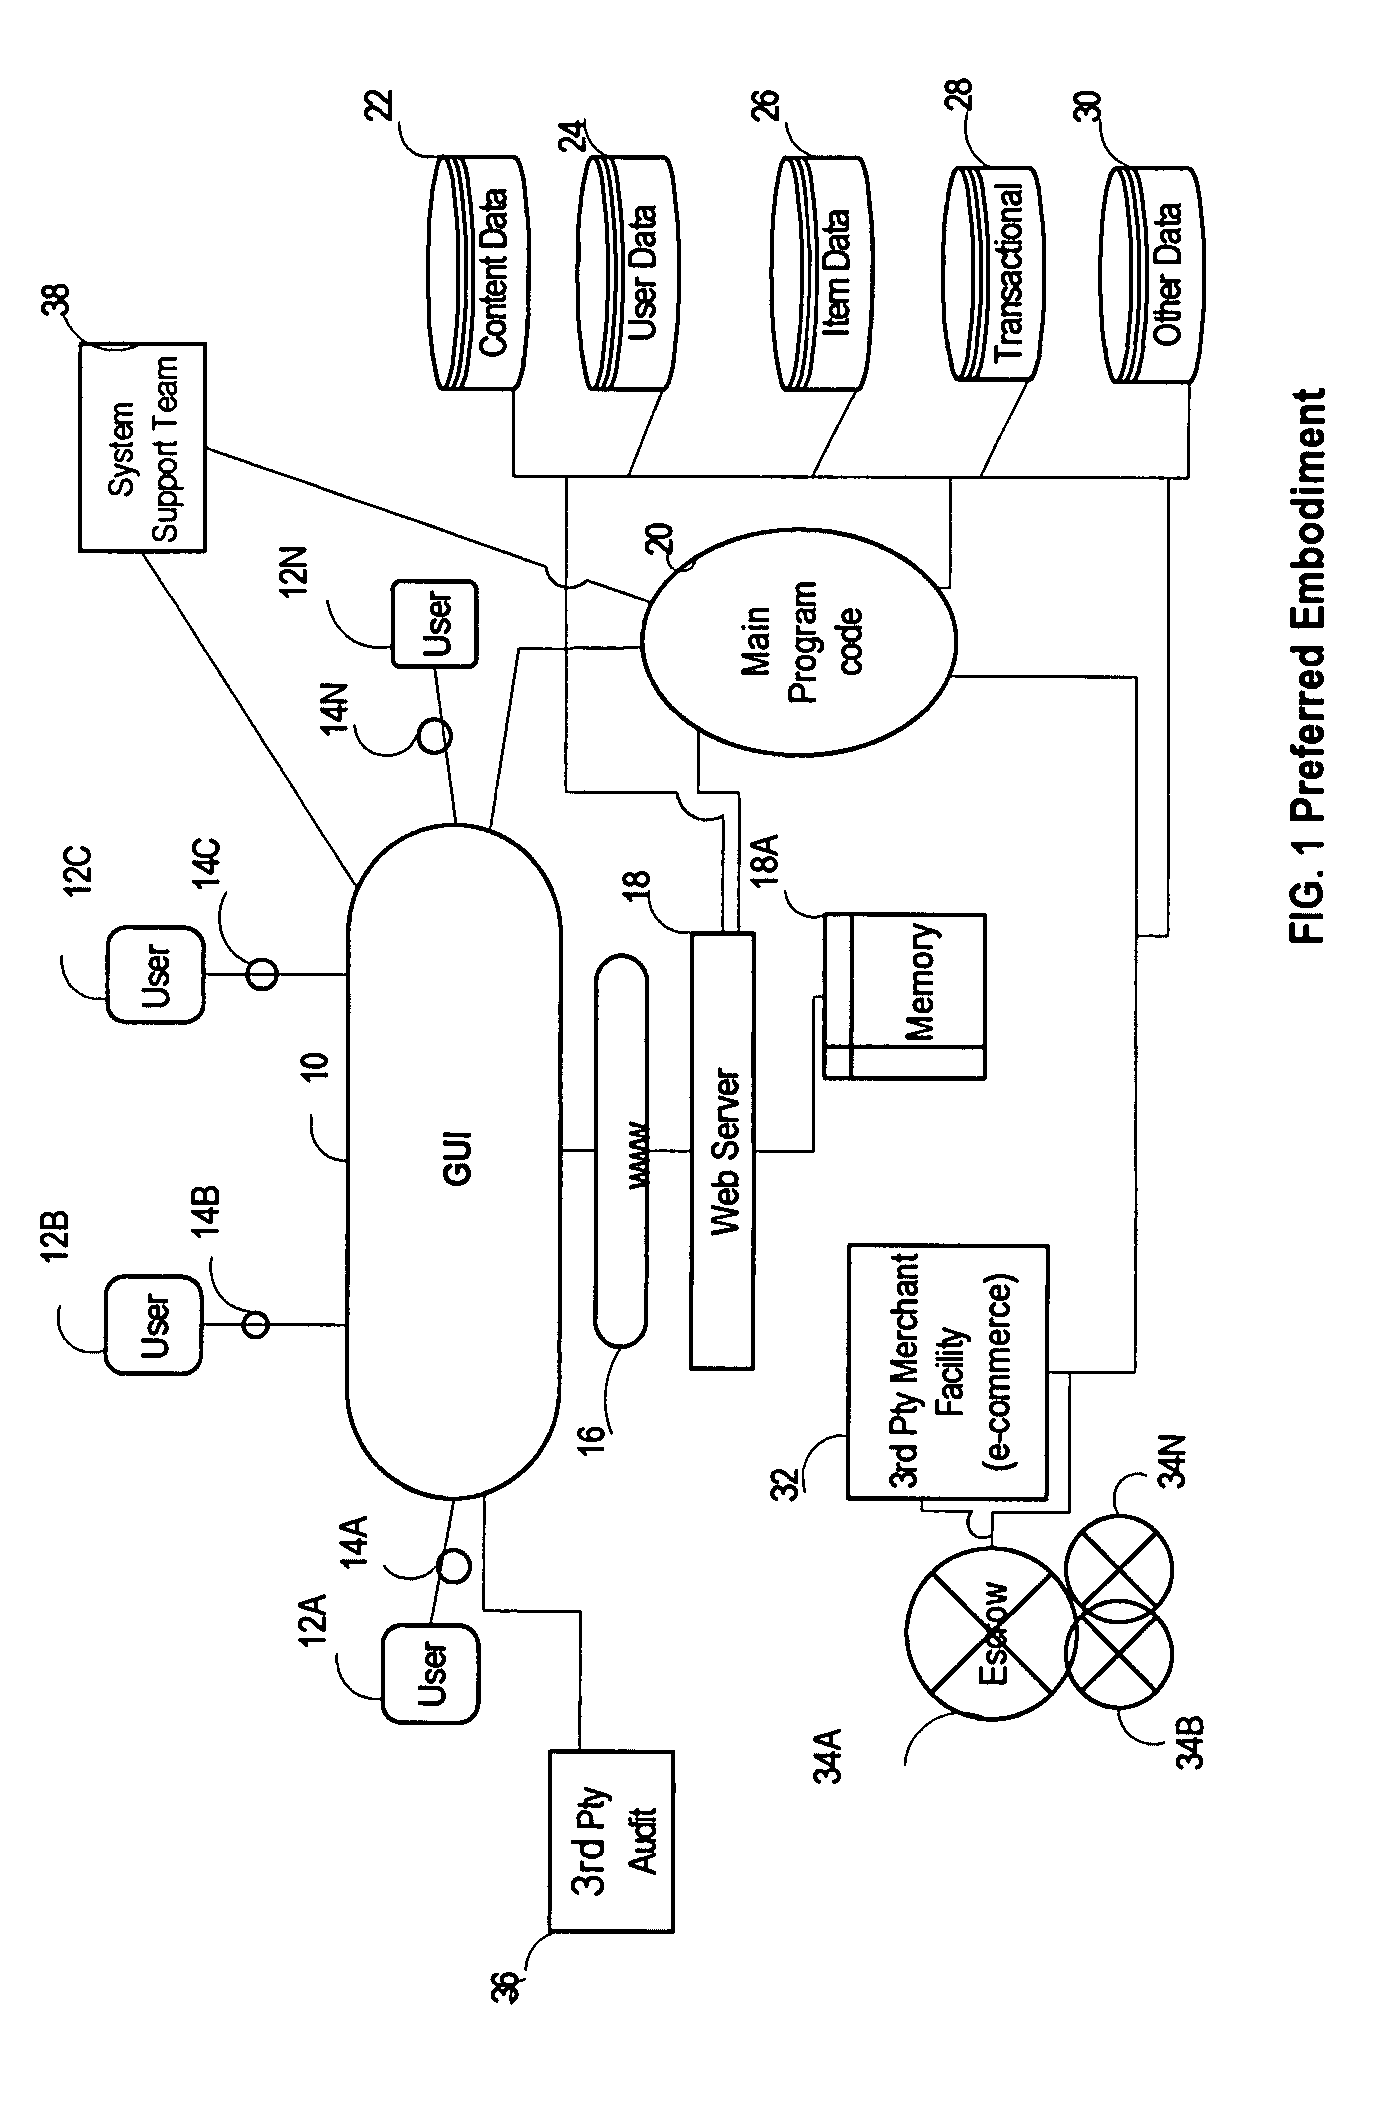 Method and instrument for generating and trading identifiable plural ownership rights in assets